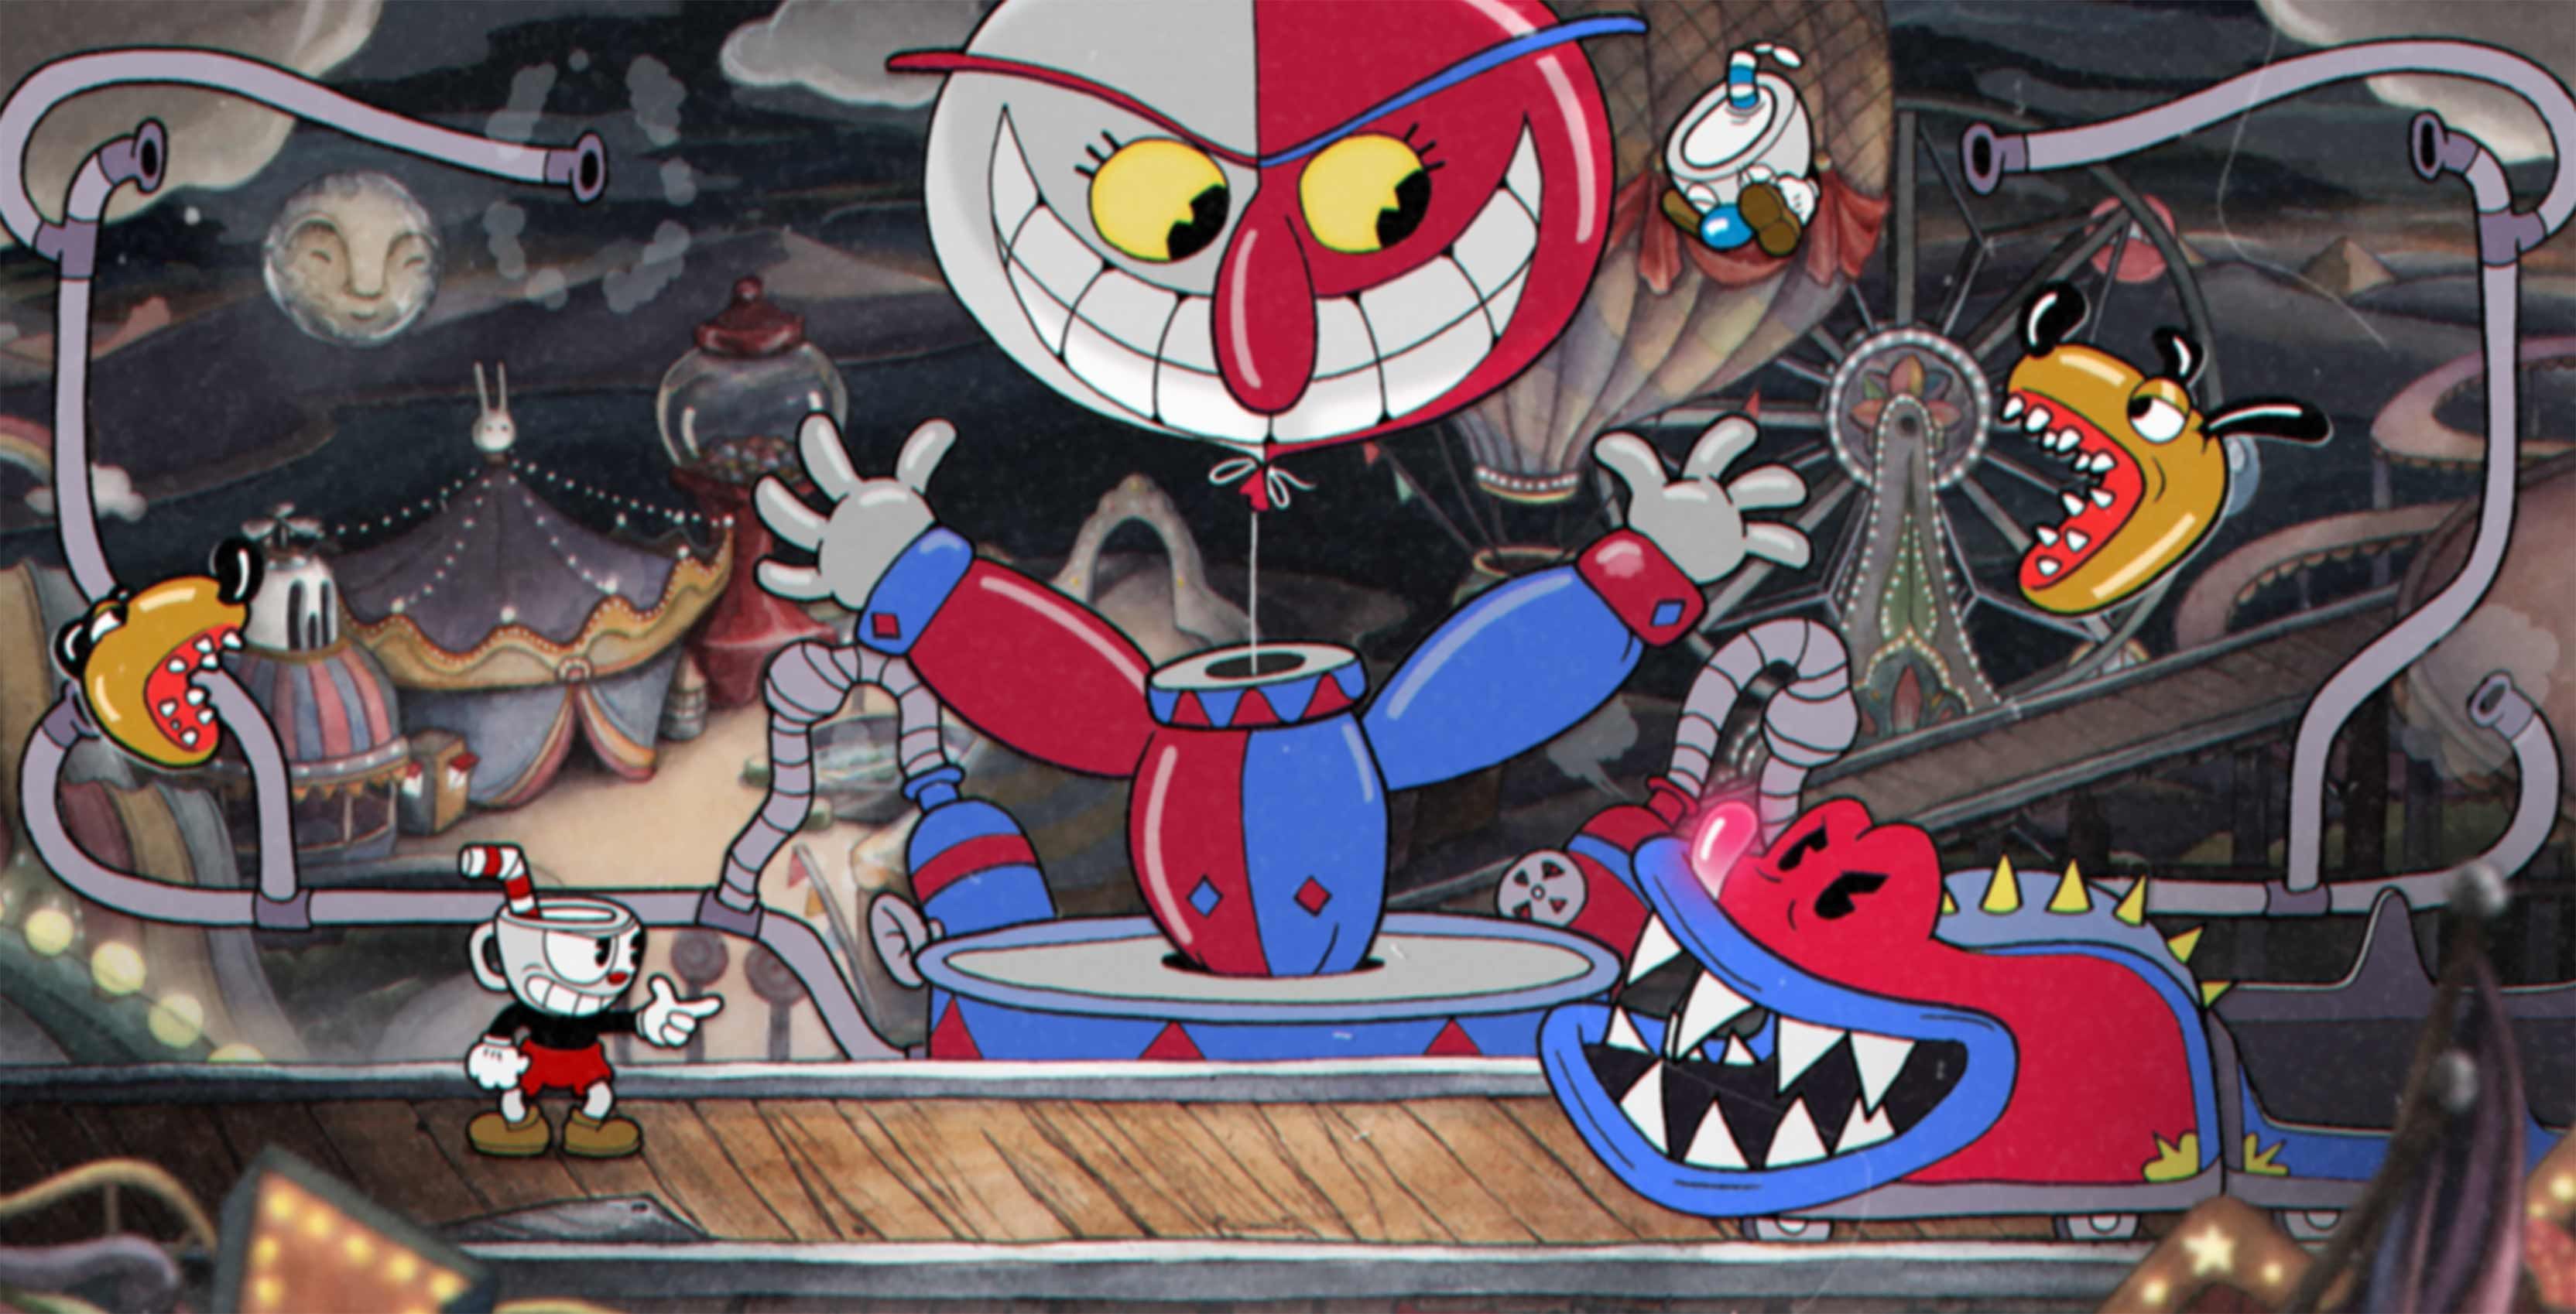 A clown and balloon themed boss in cuphead.